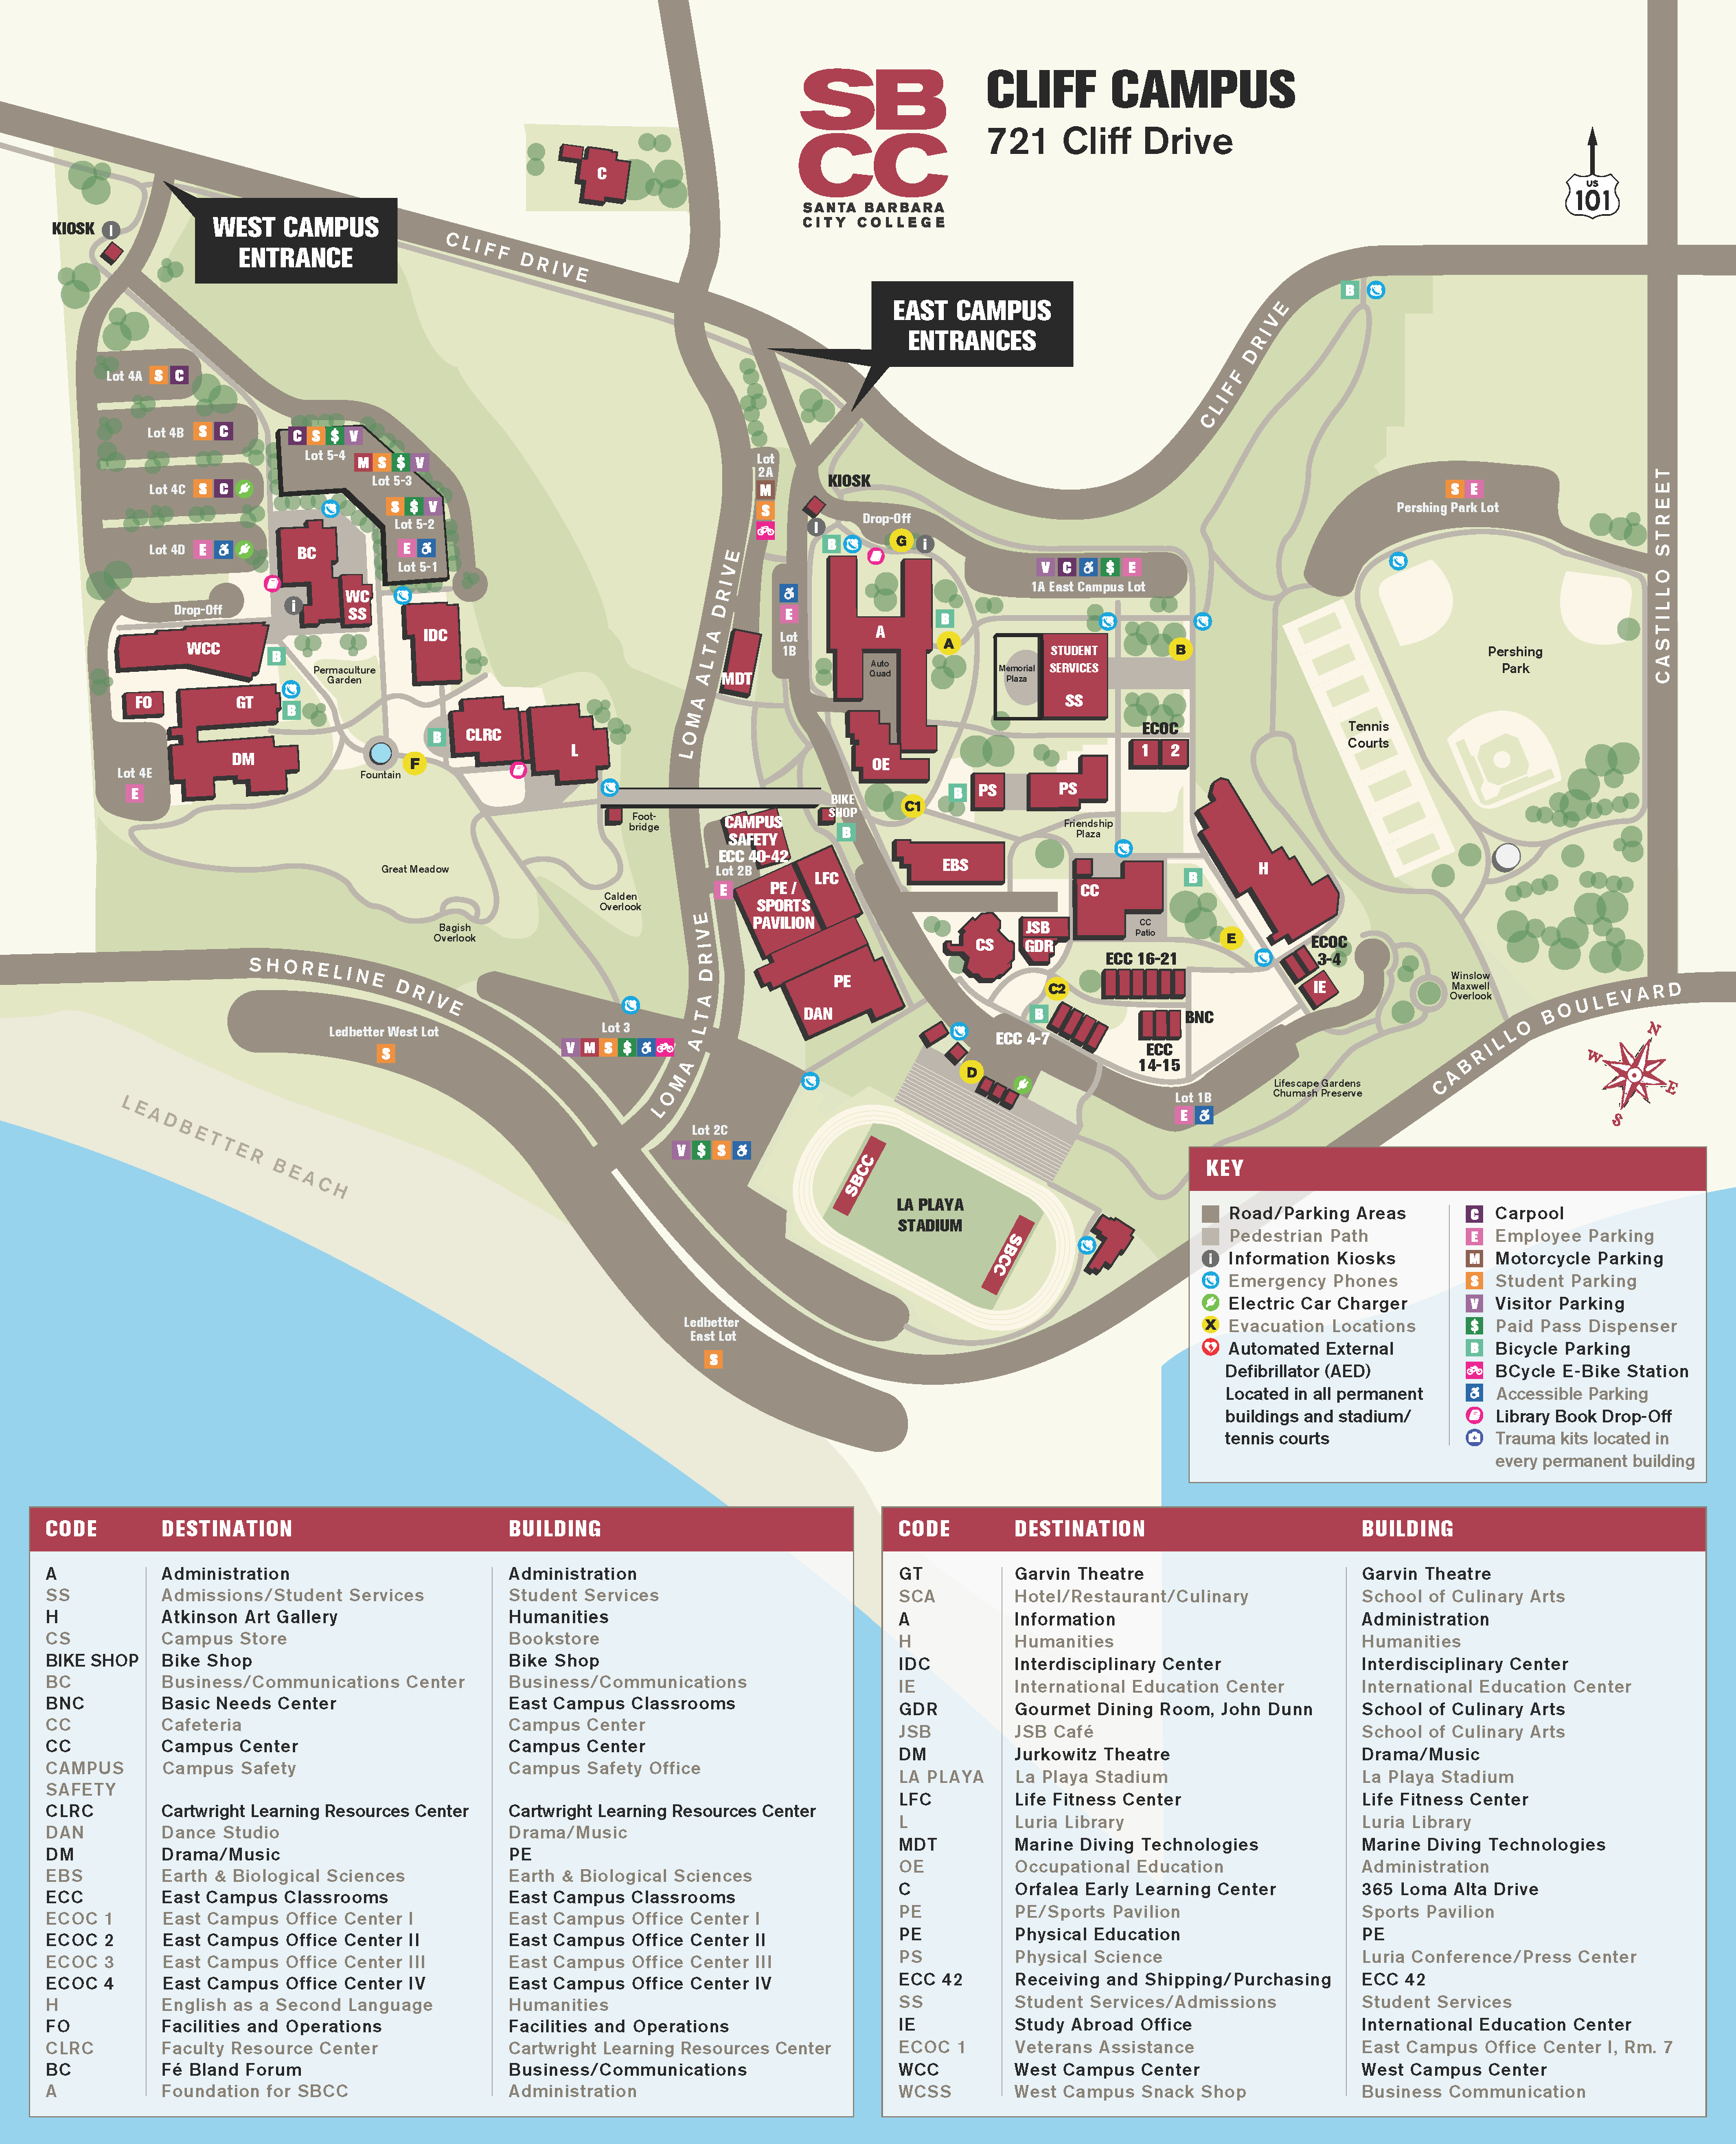 SBCC Cliff Campus Map